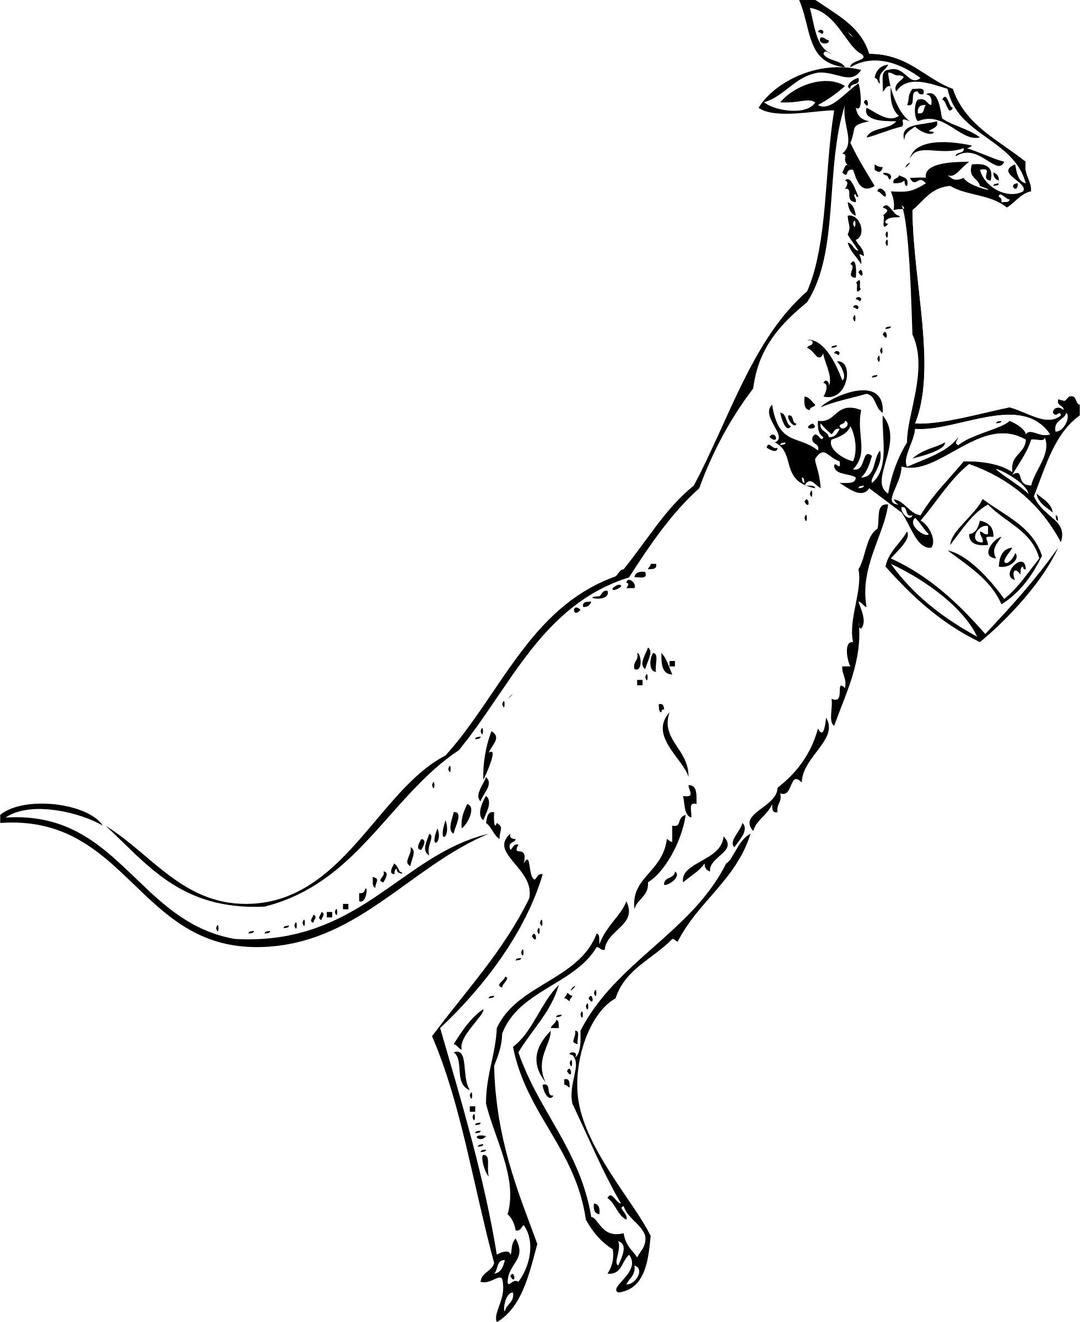 Kangaroo With Paintbrush And Paint Can png transparent